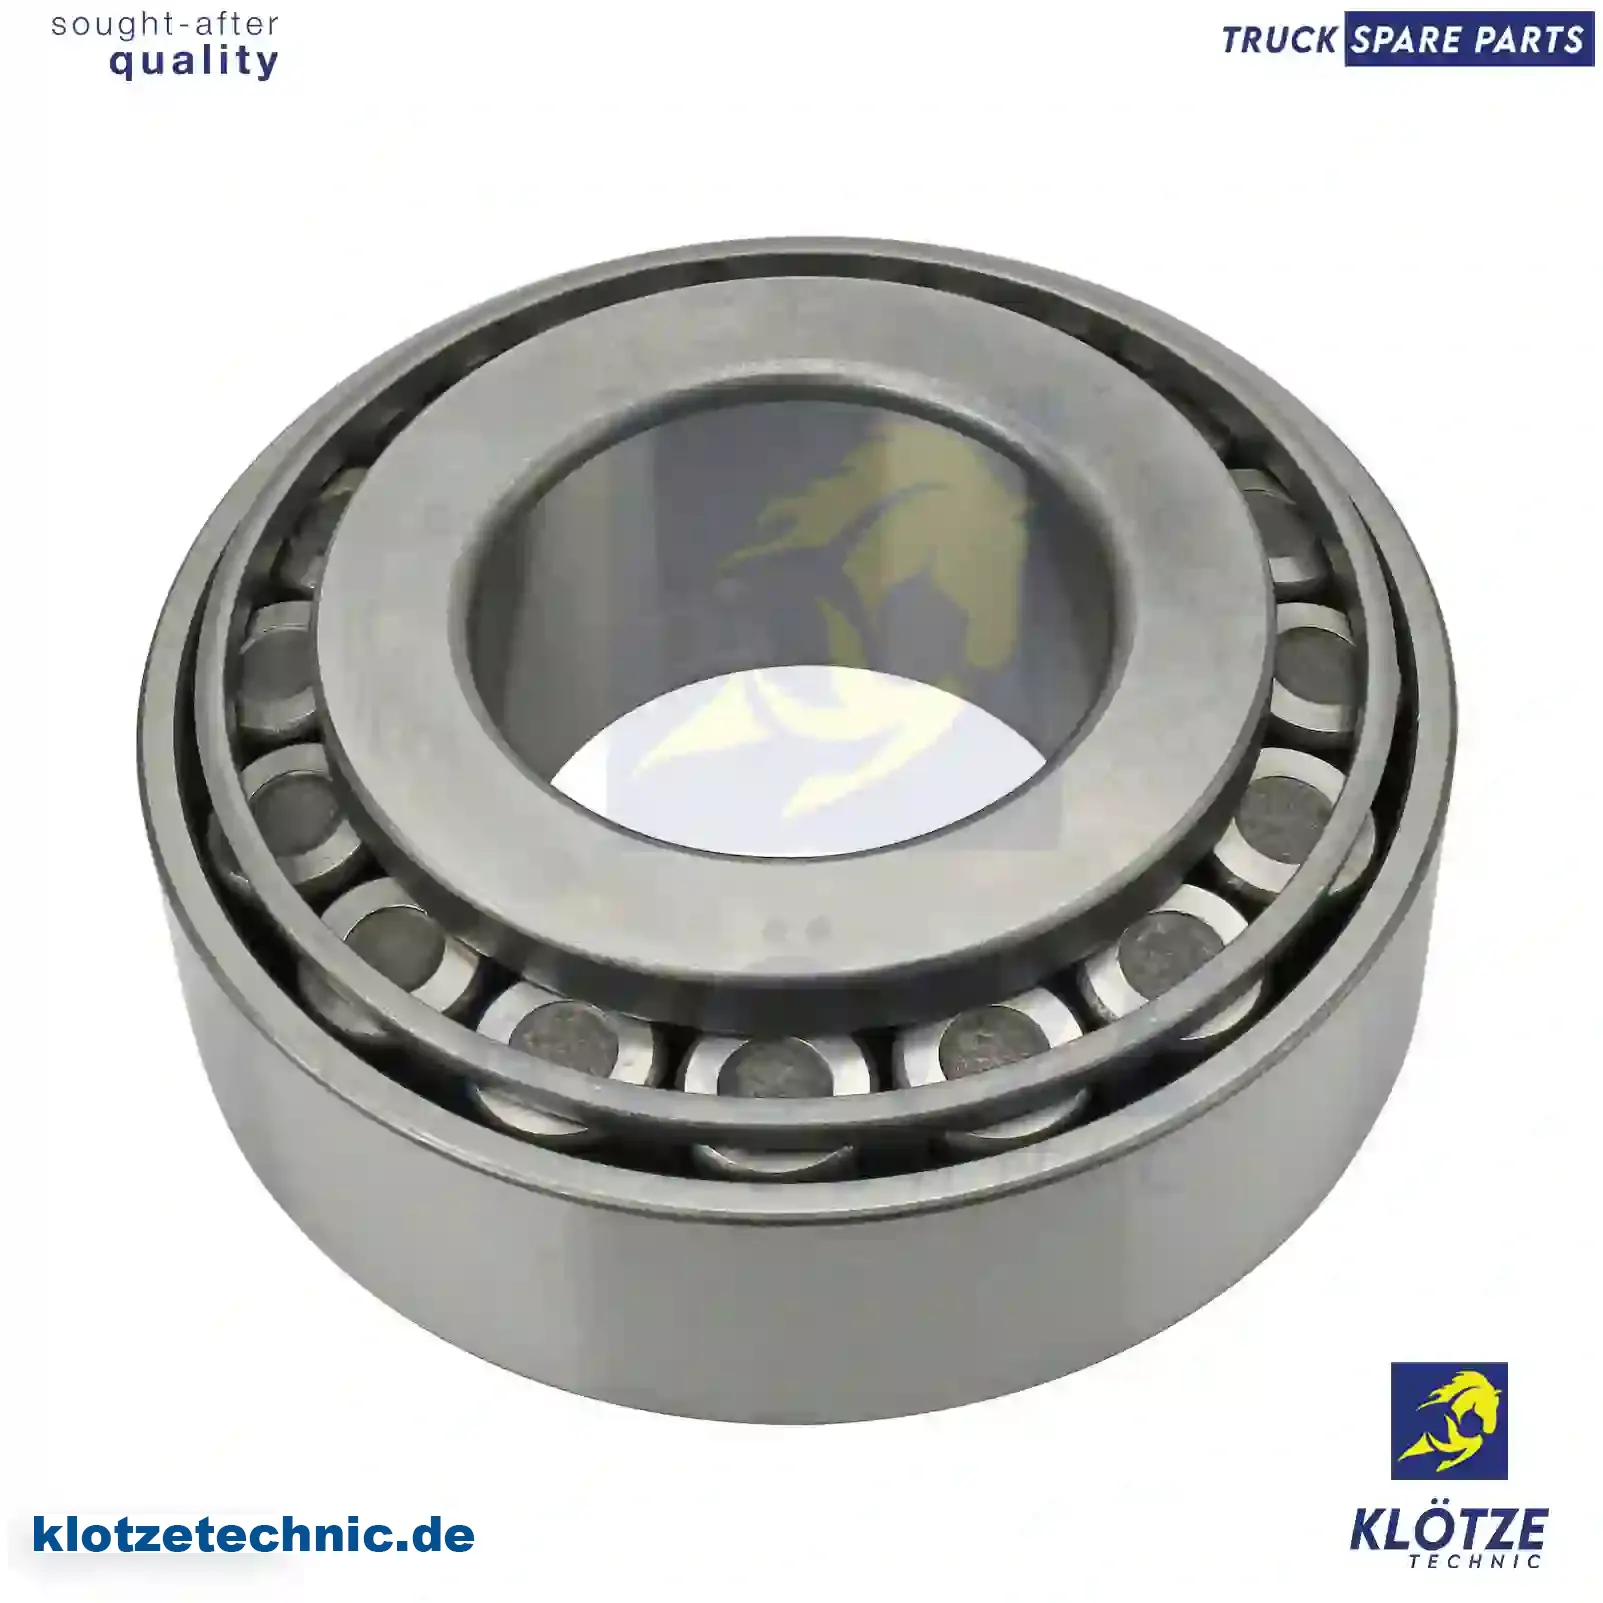 Tapered roller bearing, 4200003500, 123629,